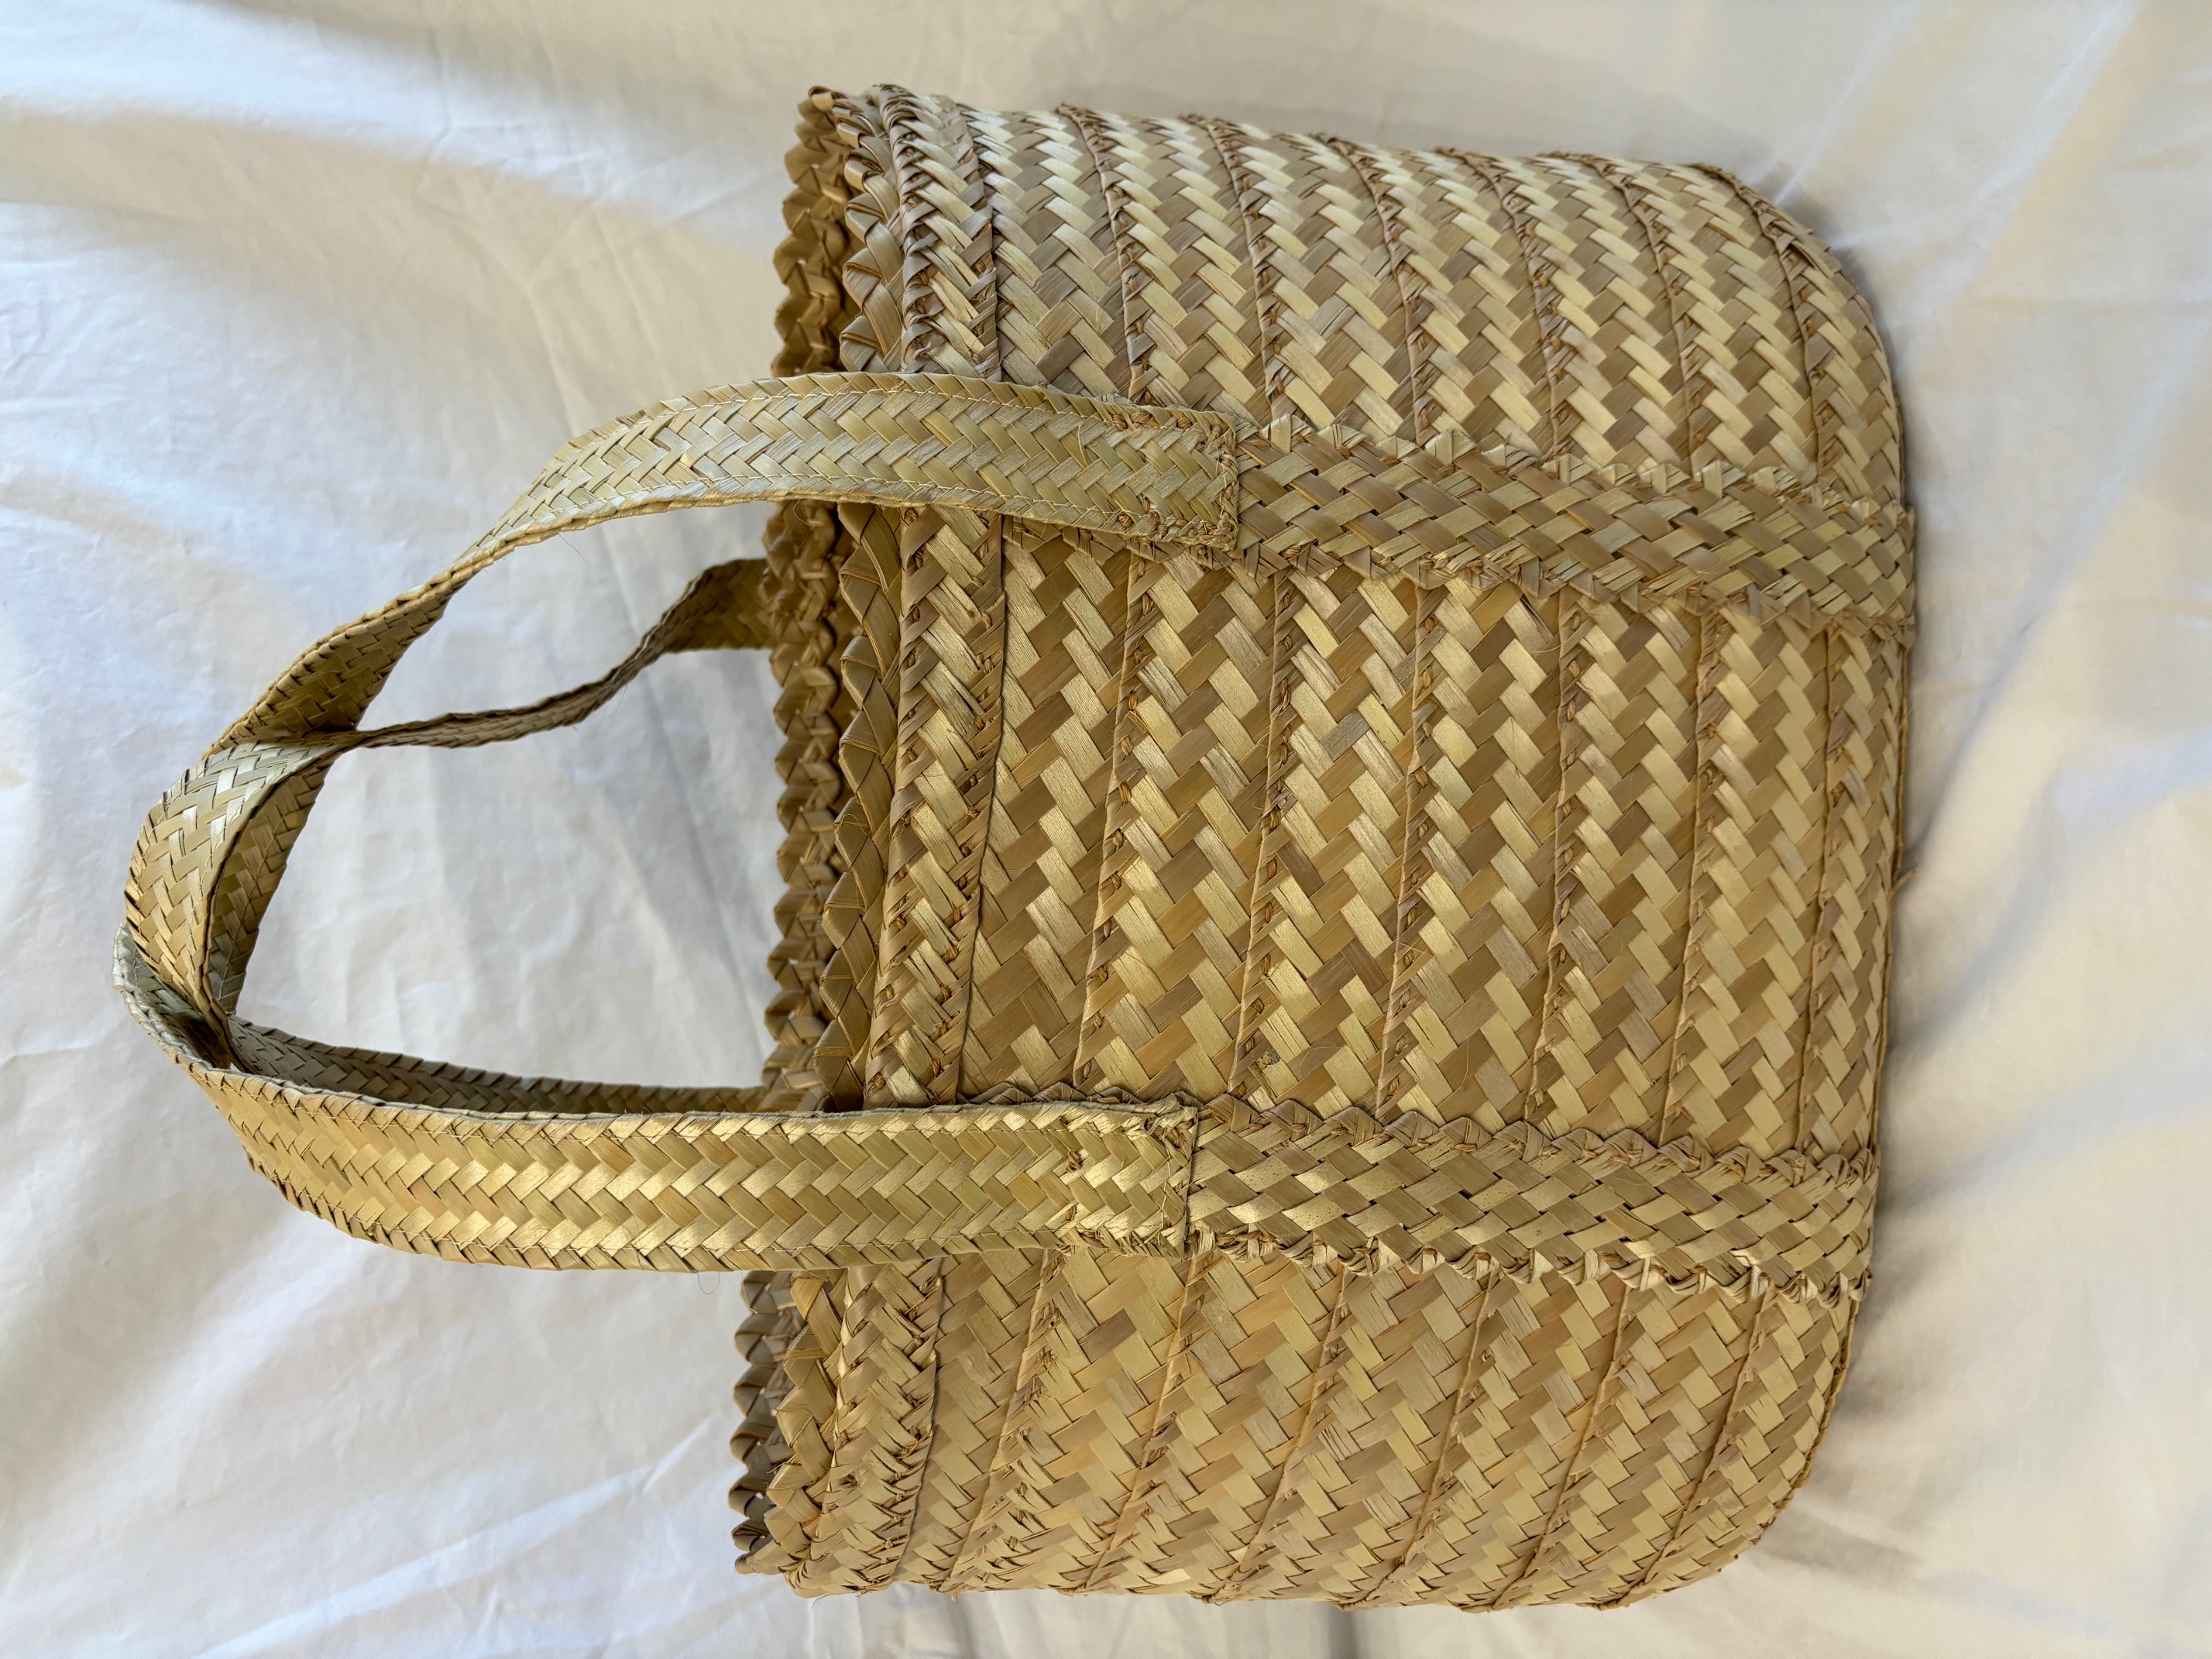 Handmade One-Of-a-Kind Thatched Basket #1